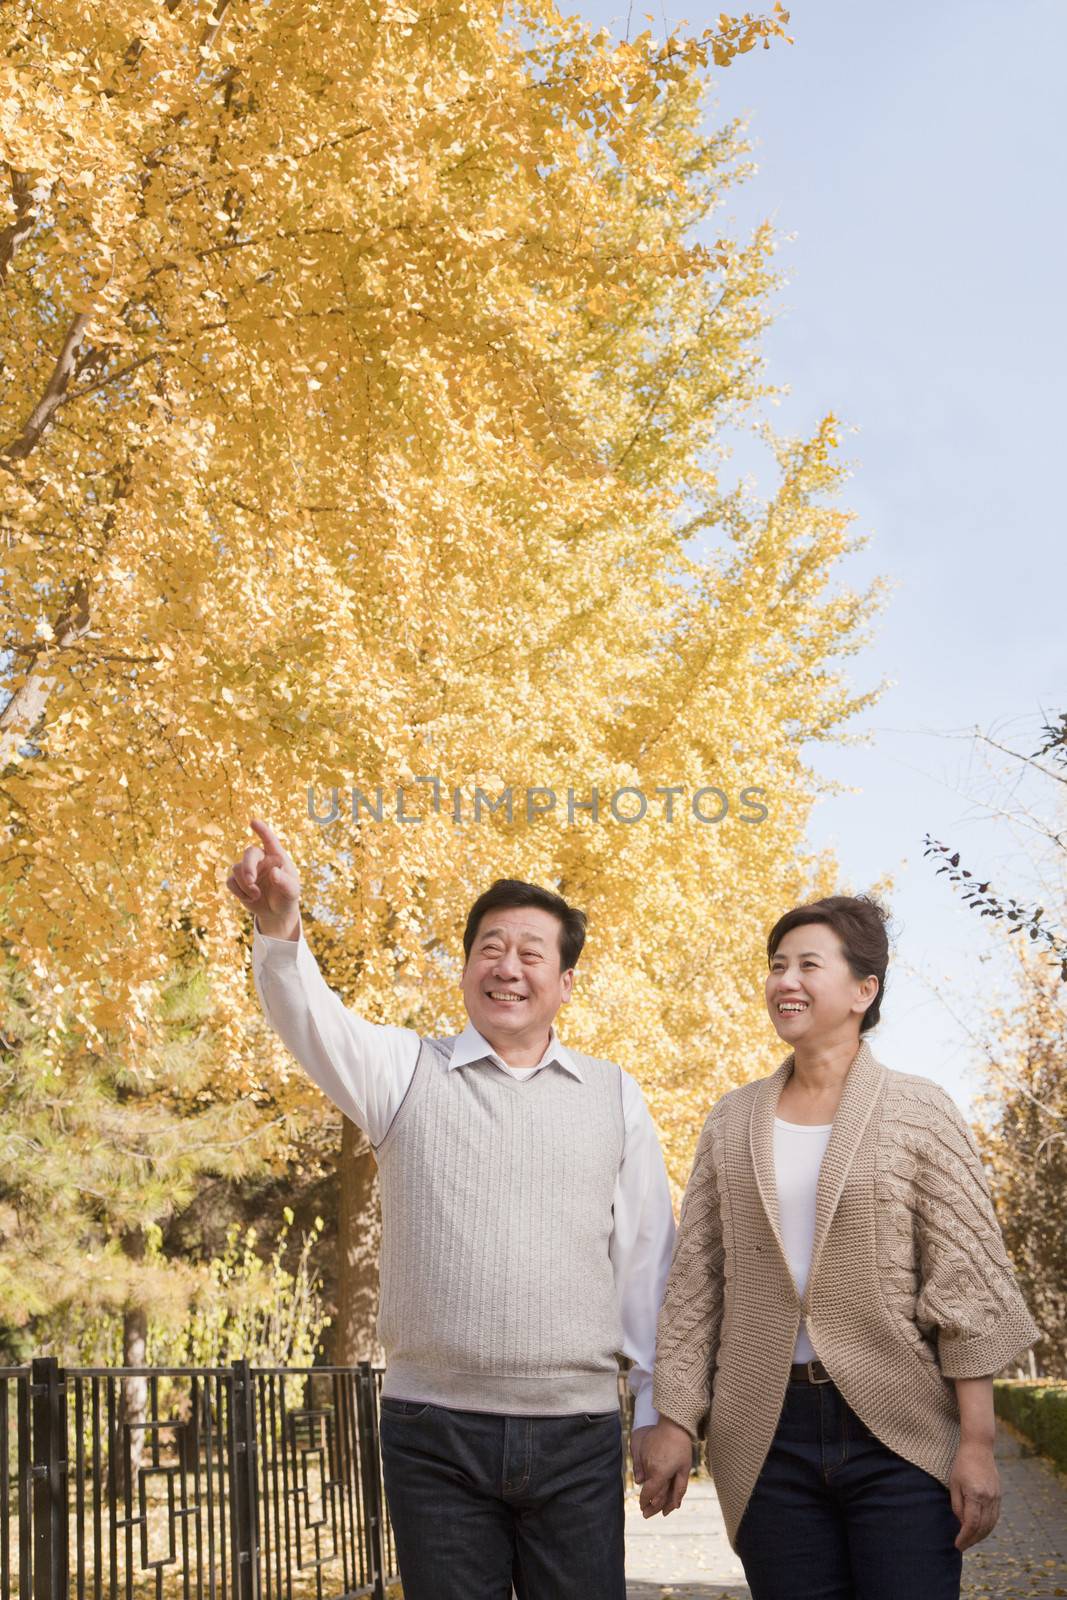 Mature Couple Walking Together in the Park